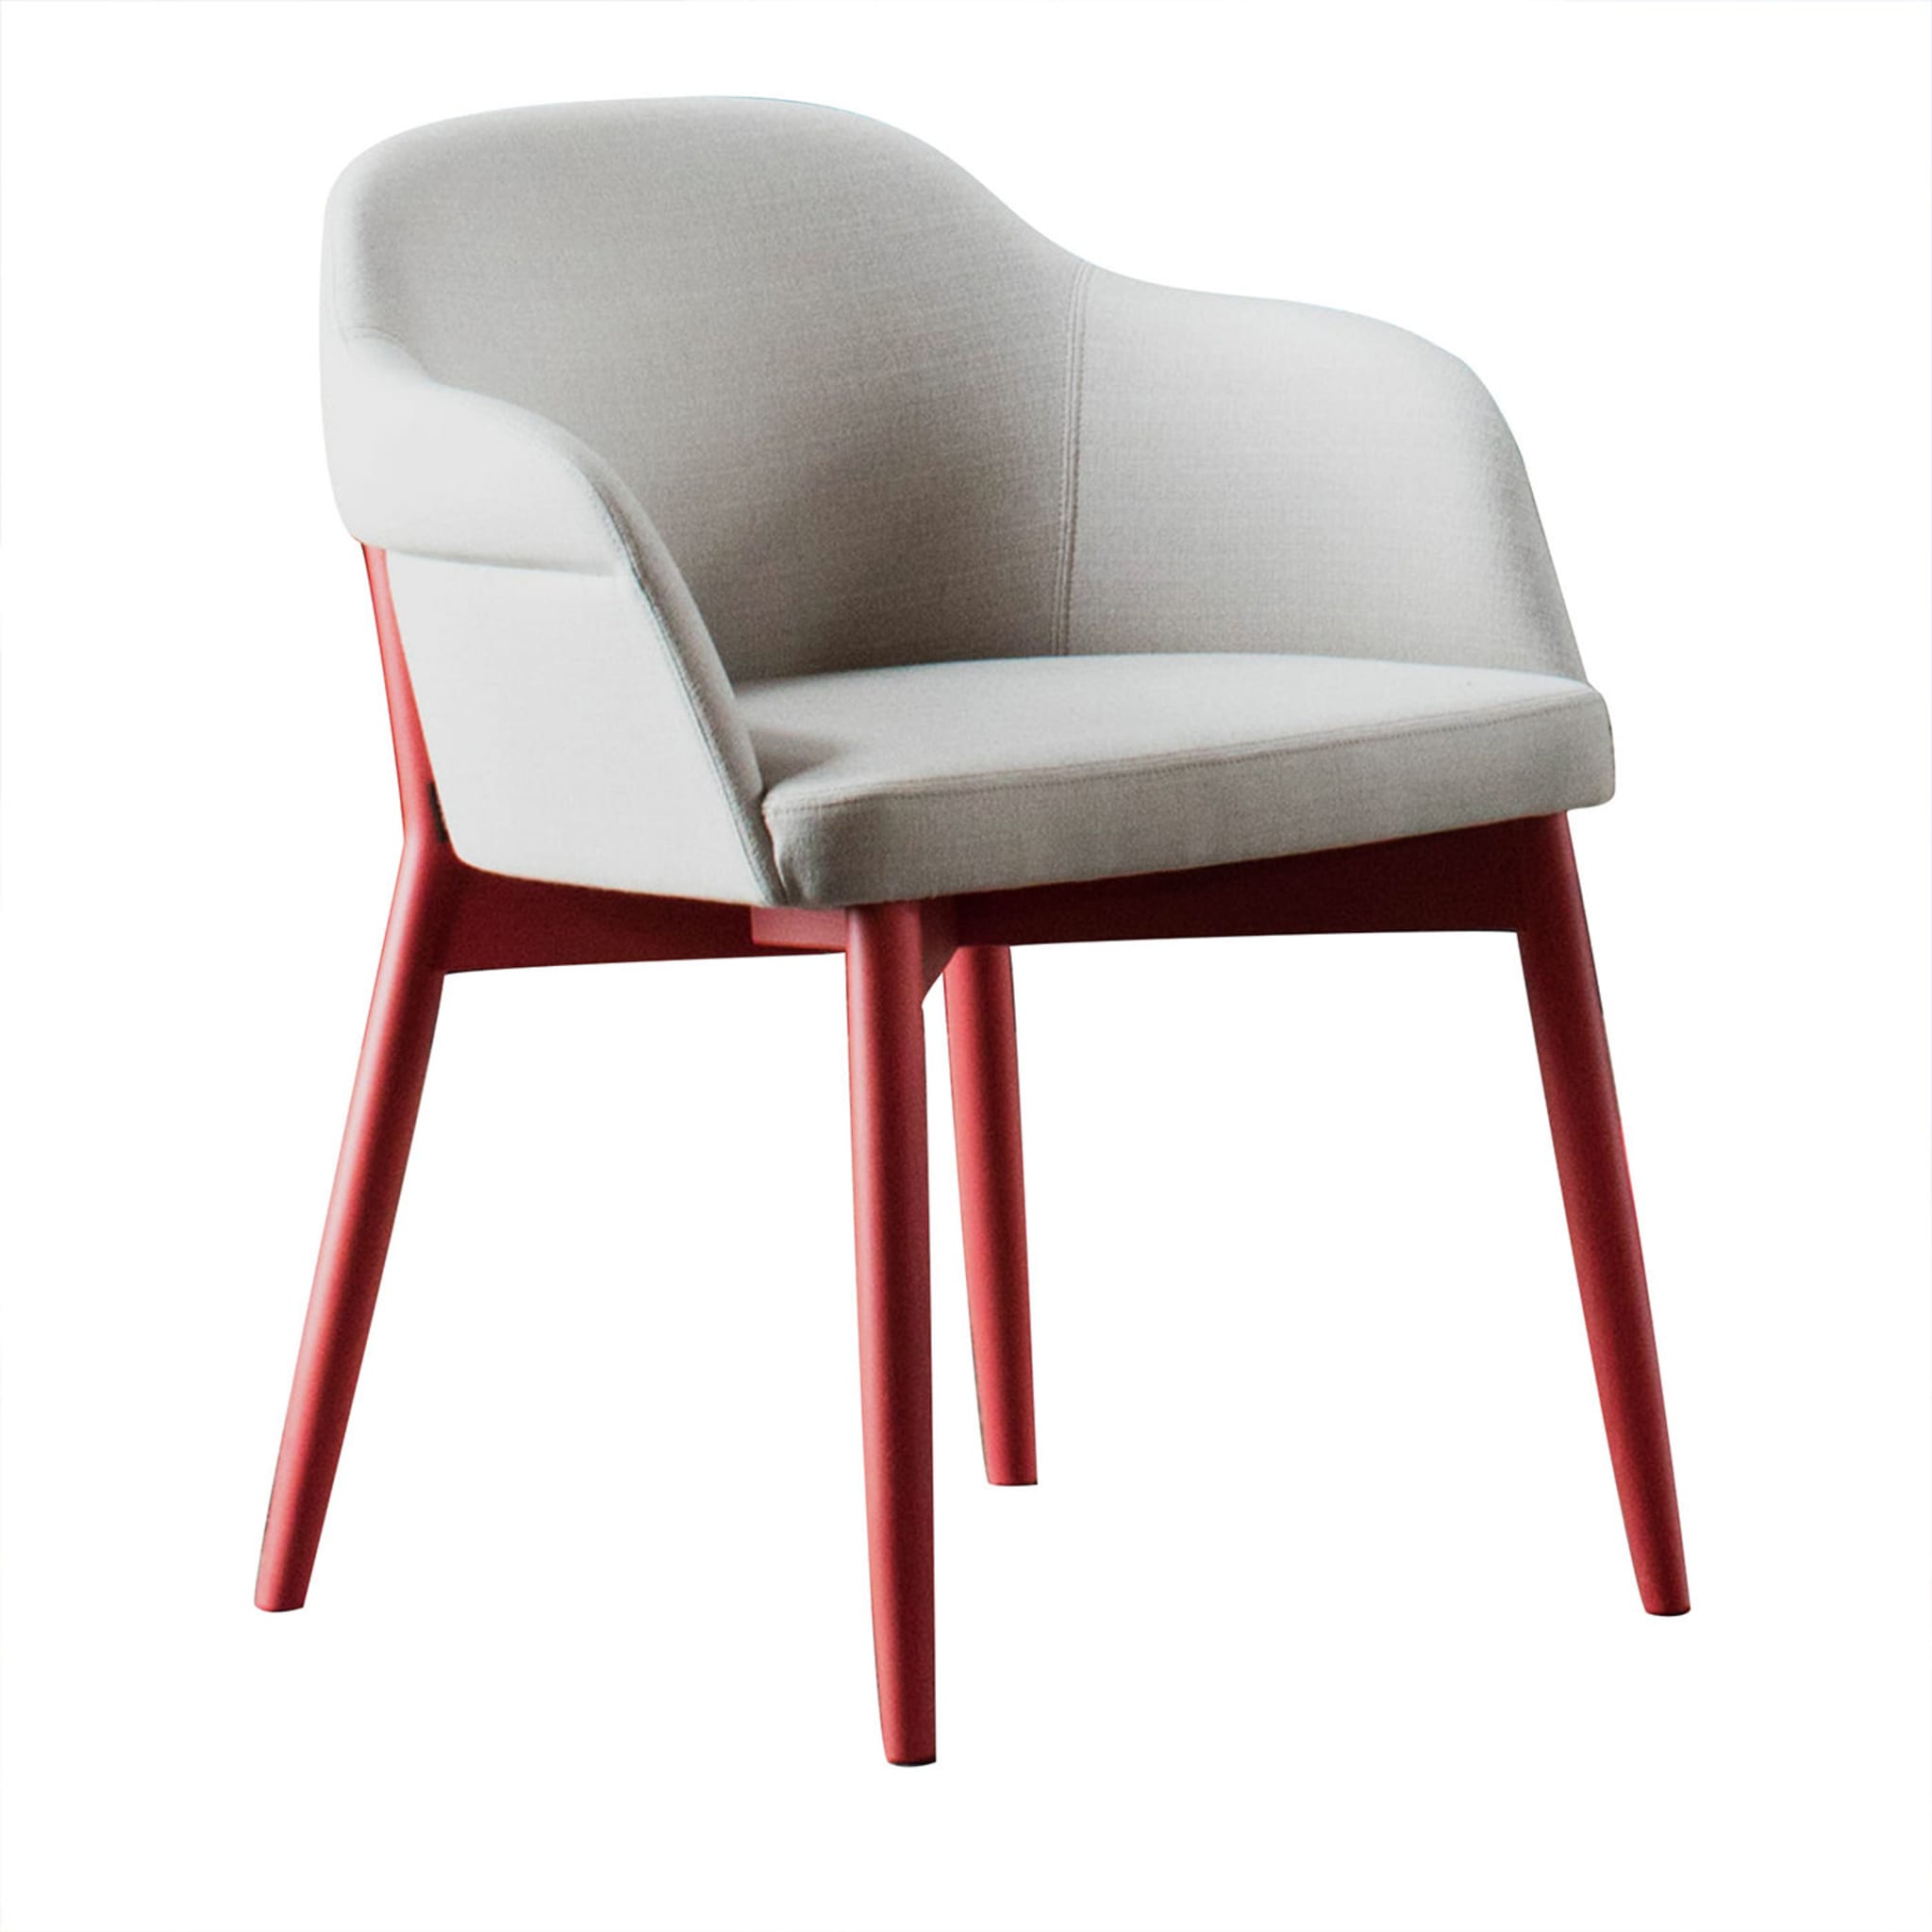 Spy 650 White and Red Armchair by Emilio Nanni - Main view